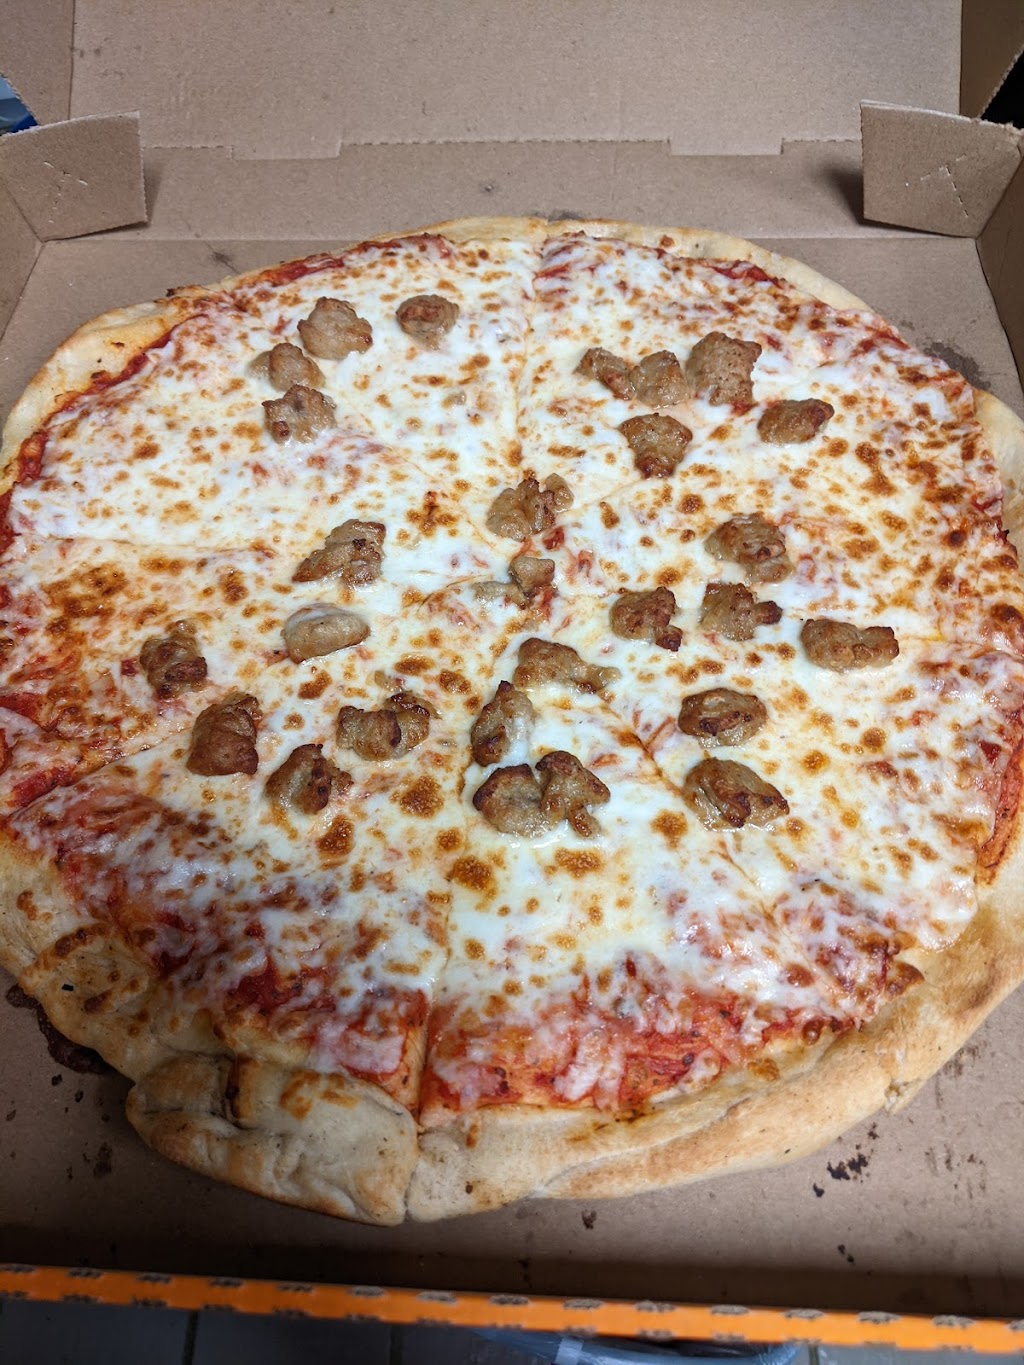 Little Caesars Pizza | 2321 East Ave, Akron, OH 44314, USA | Phone: (330) 745-5999